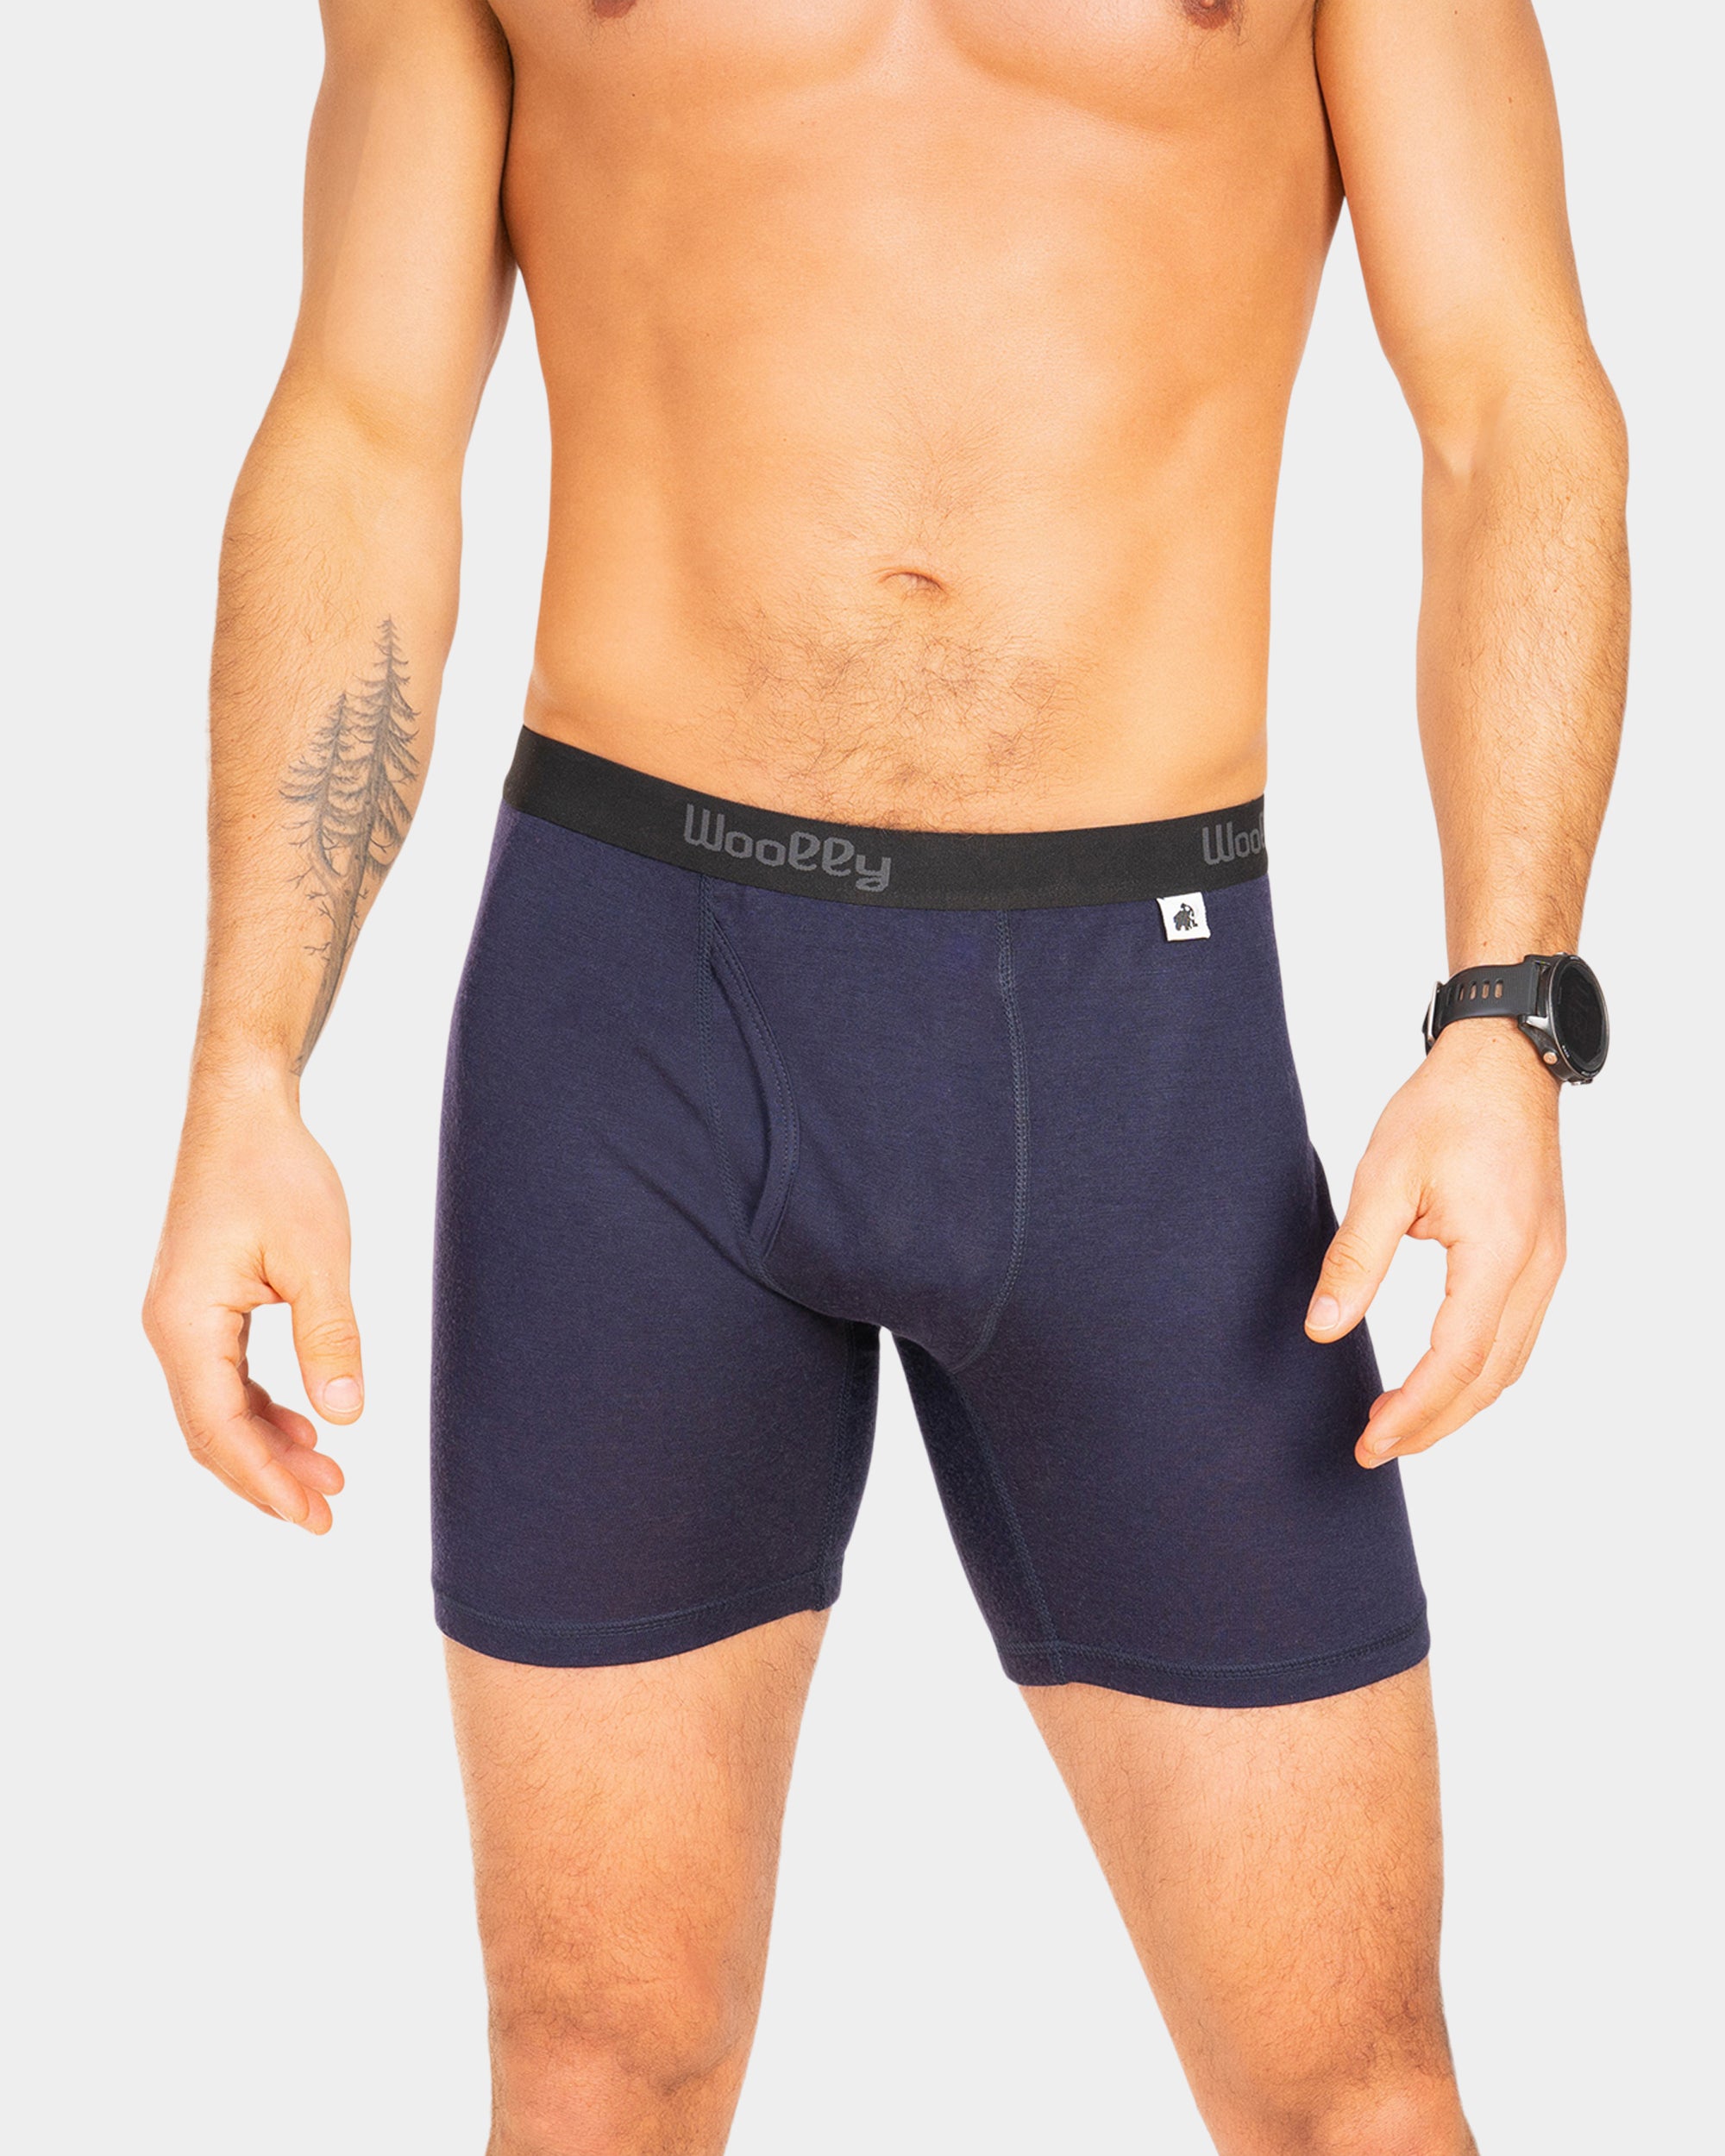 Woolly Clothing Co. Men's Longdrop Boxer Brief